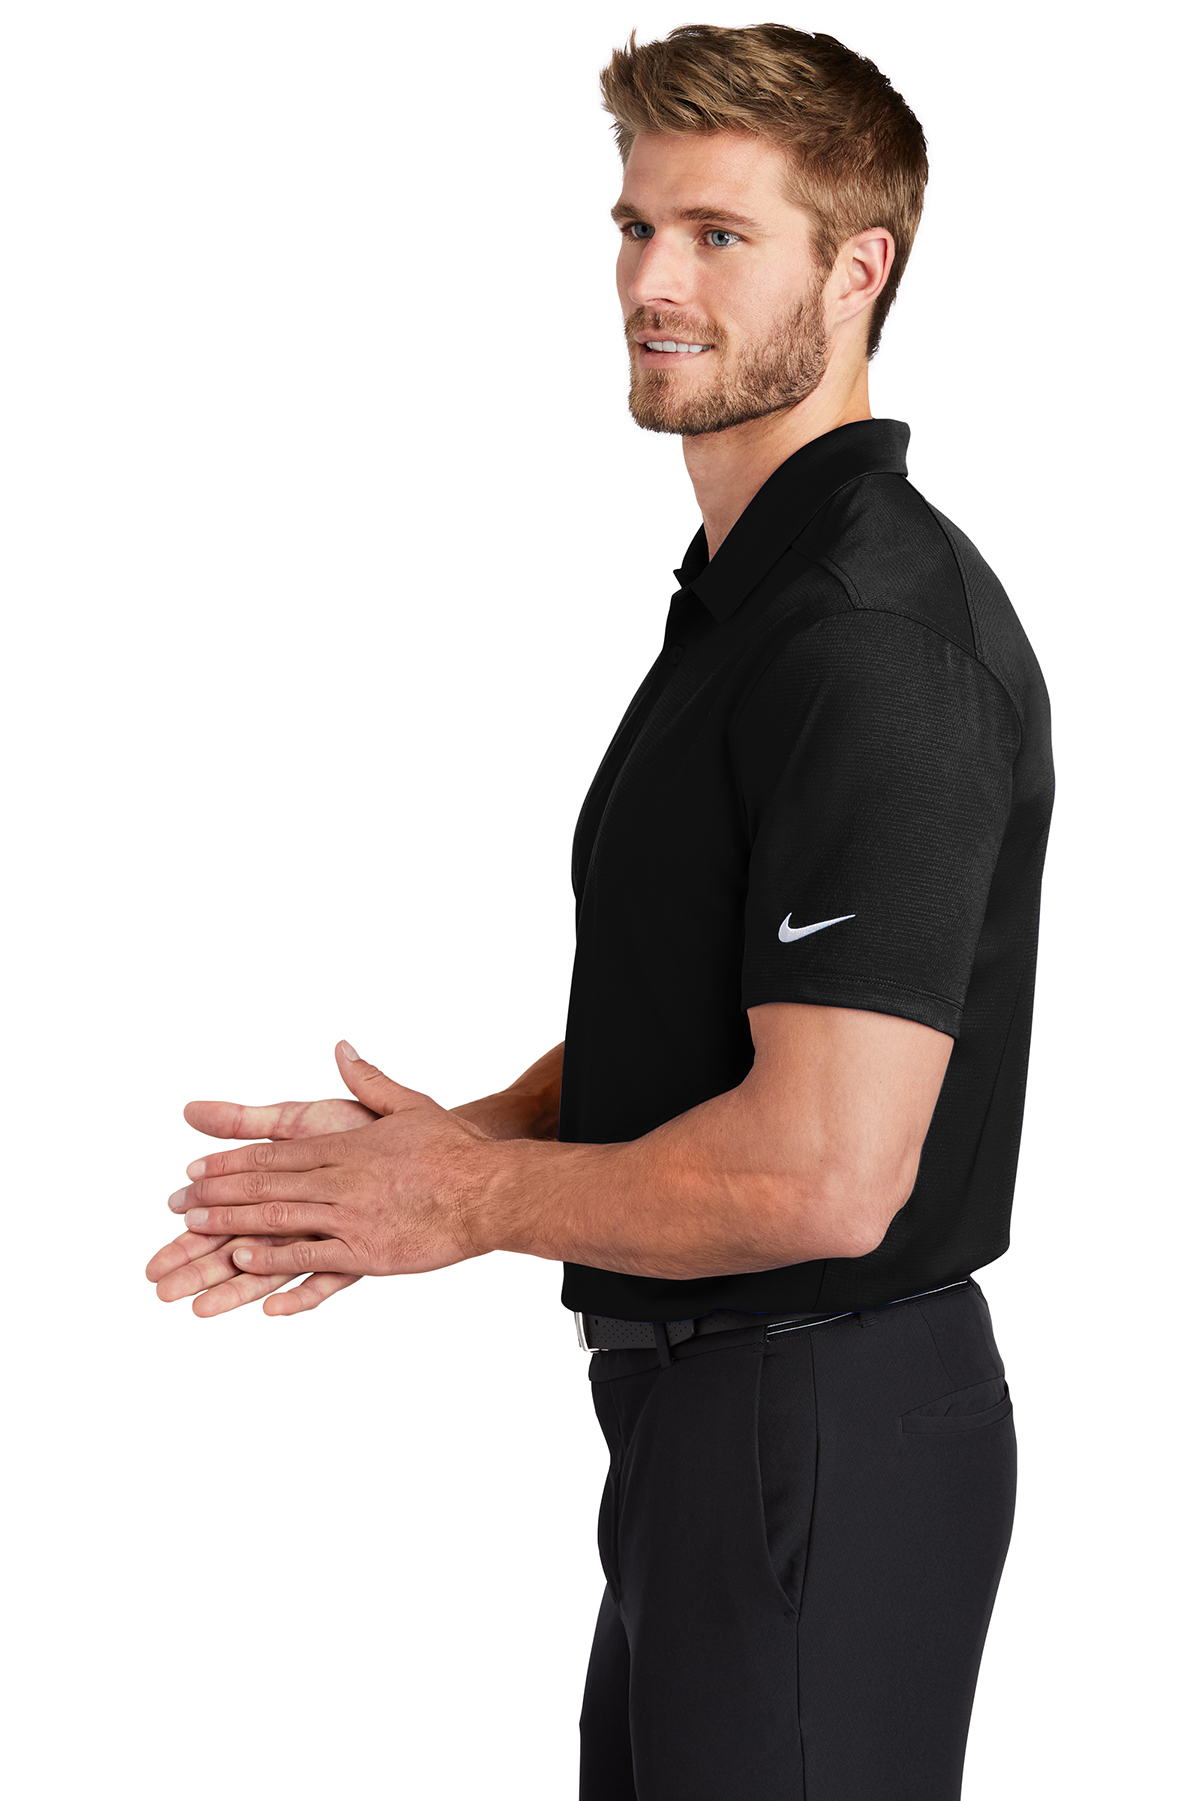 nike dry essential solid polo